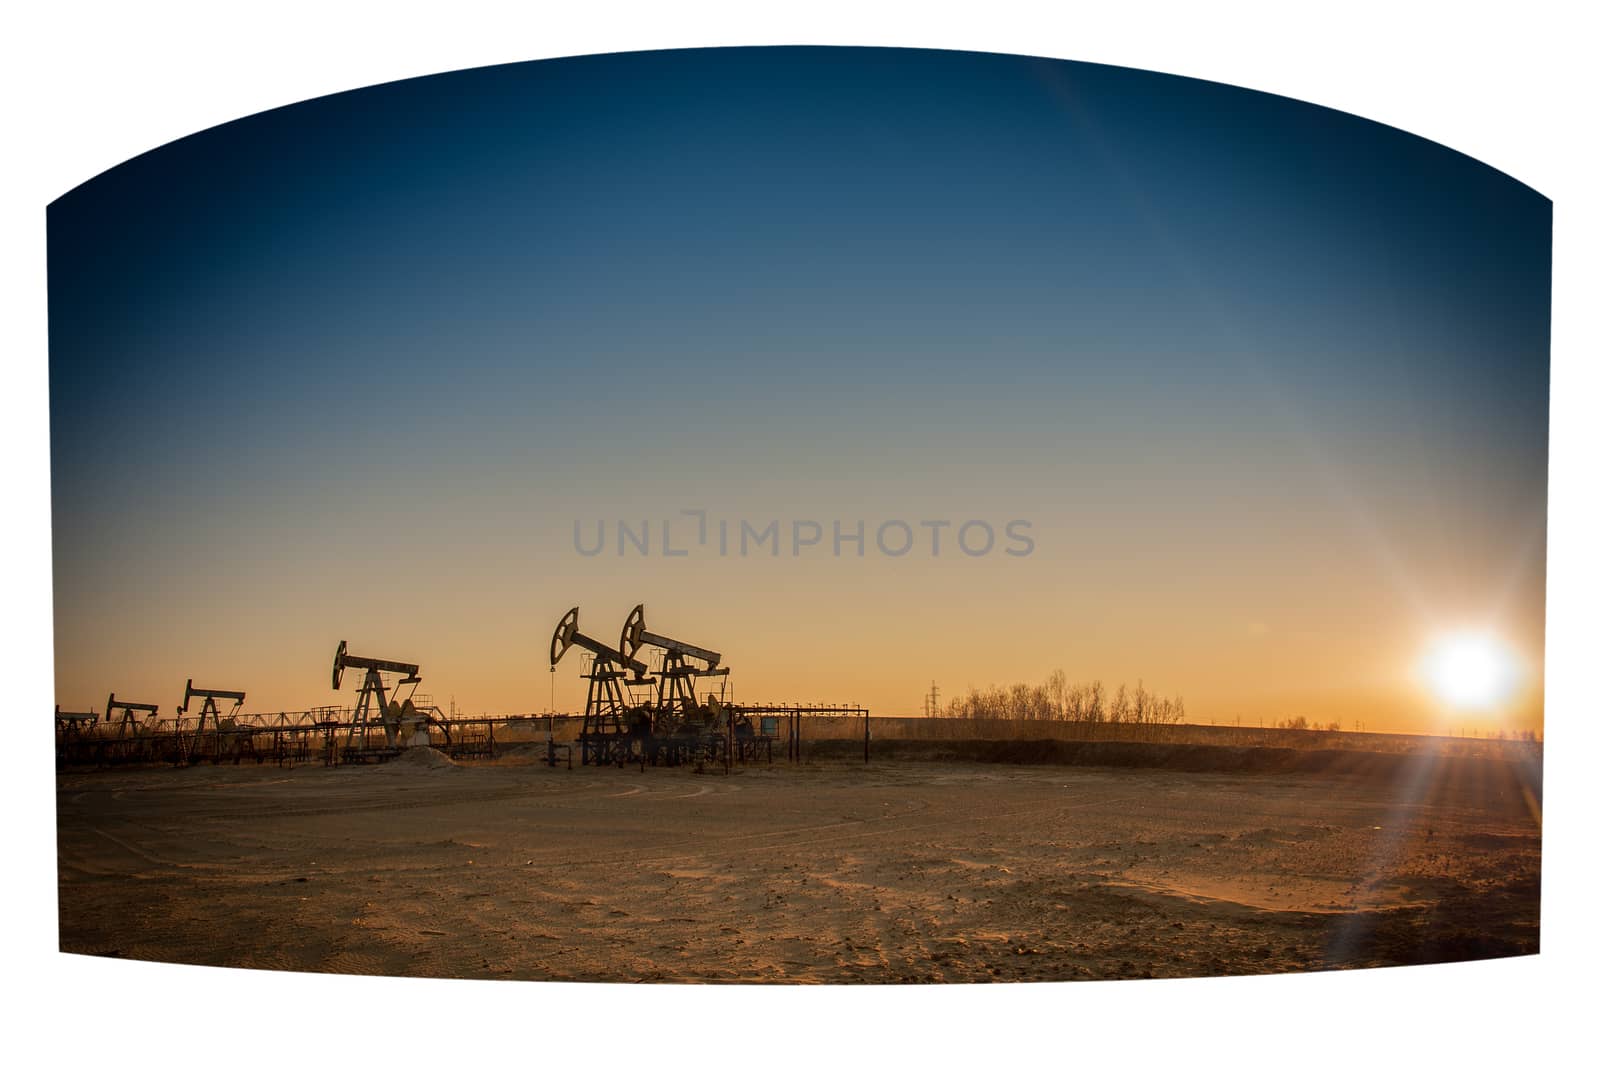 Oil pumps on the sunset sky background.